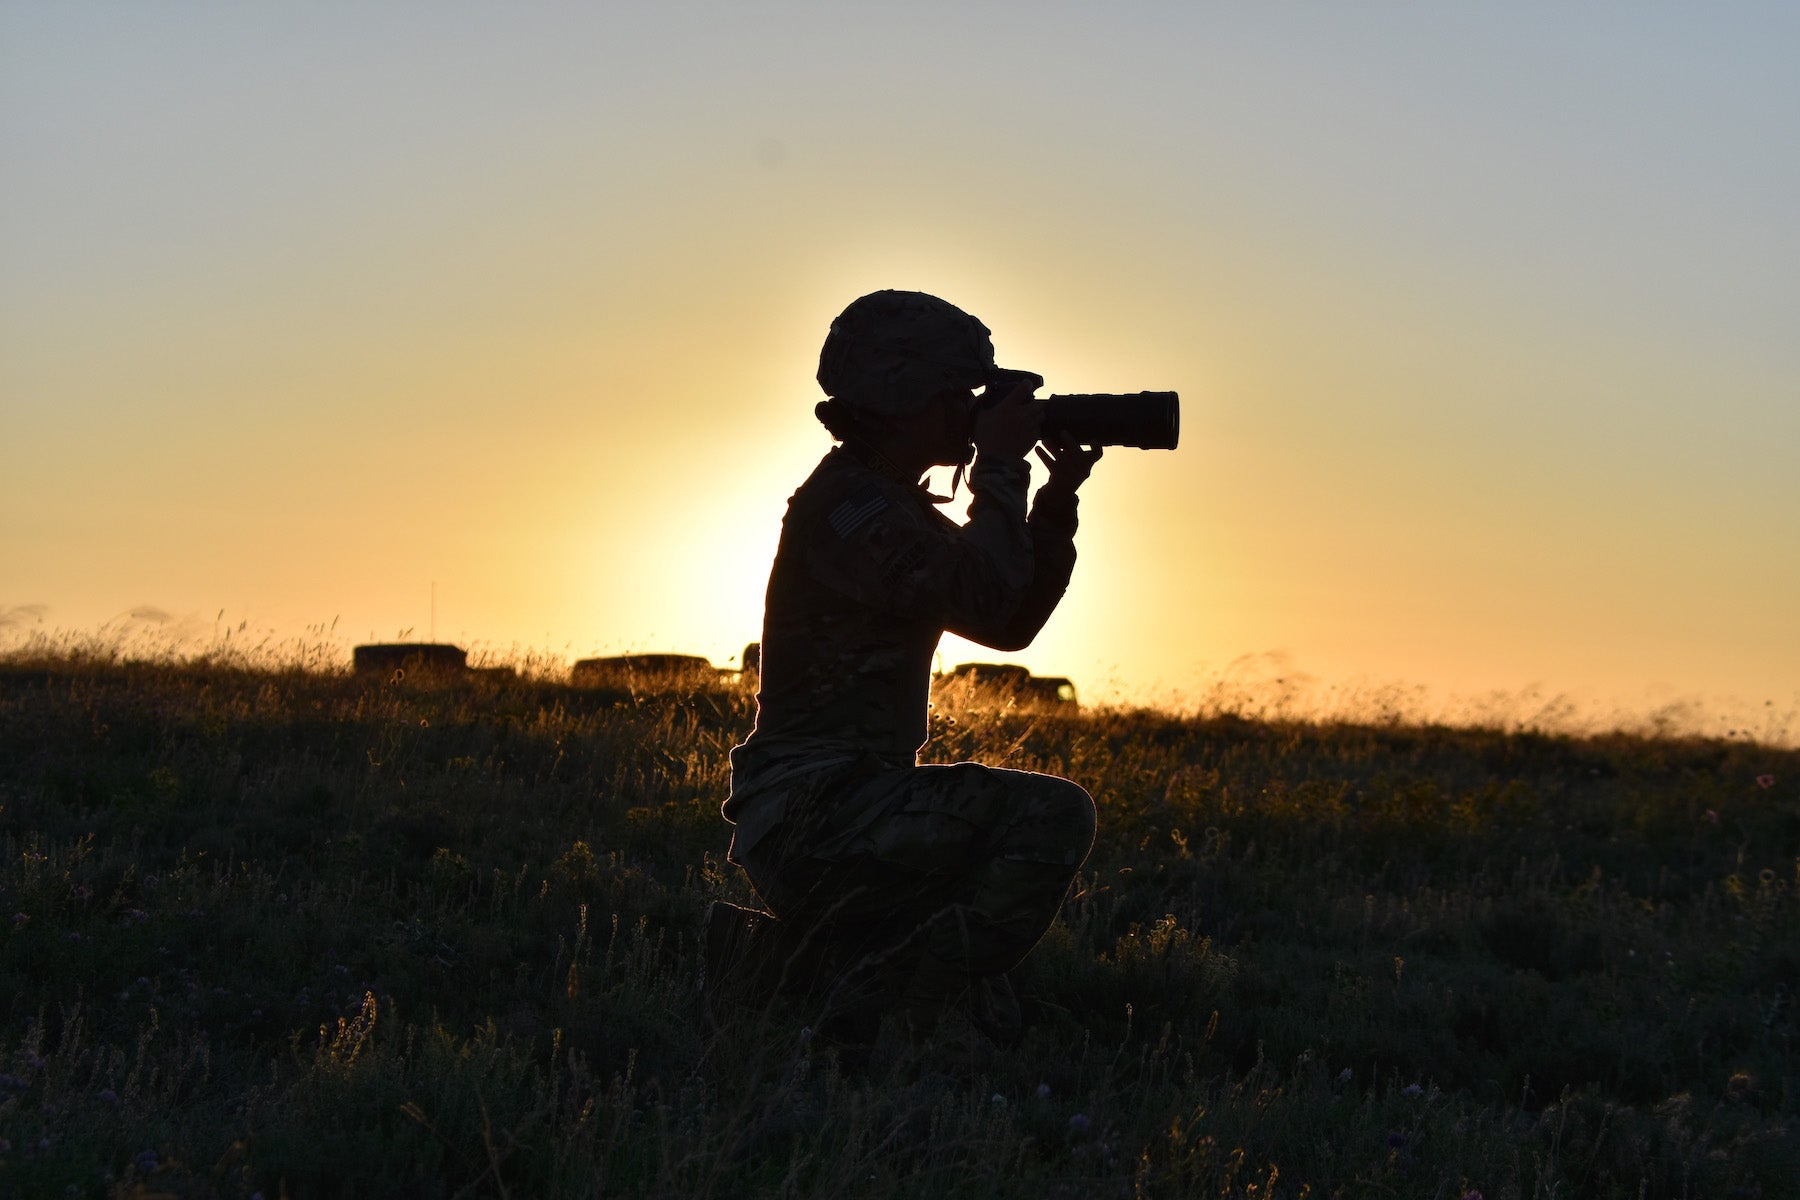 Battlefield Fallujah: Image Rights - Image of Military Photographer with camera